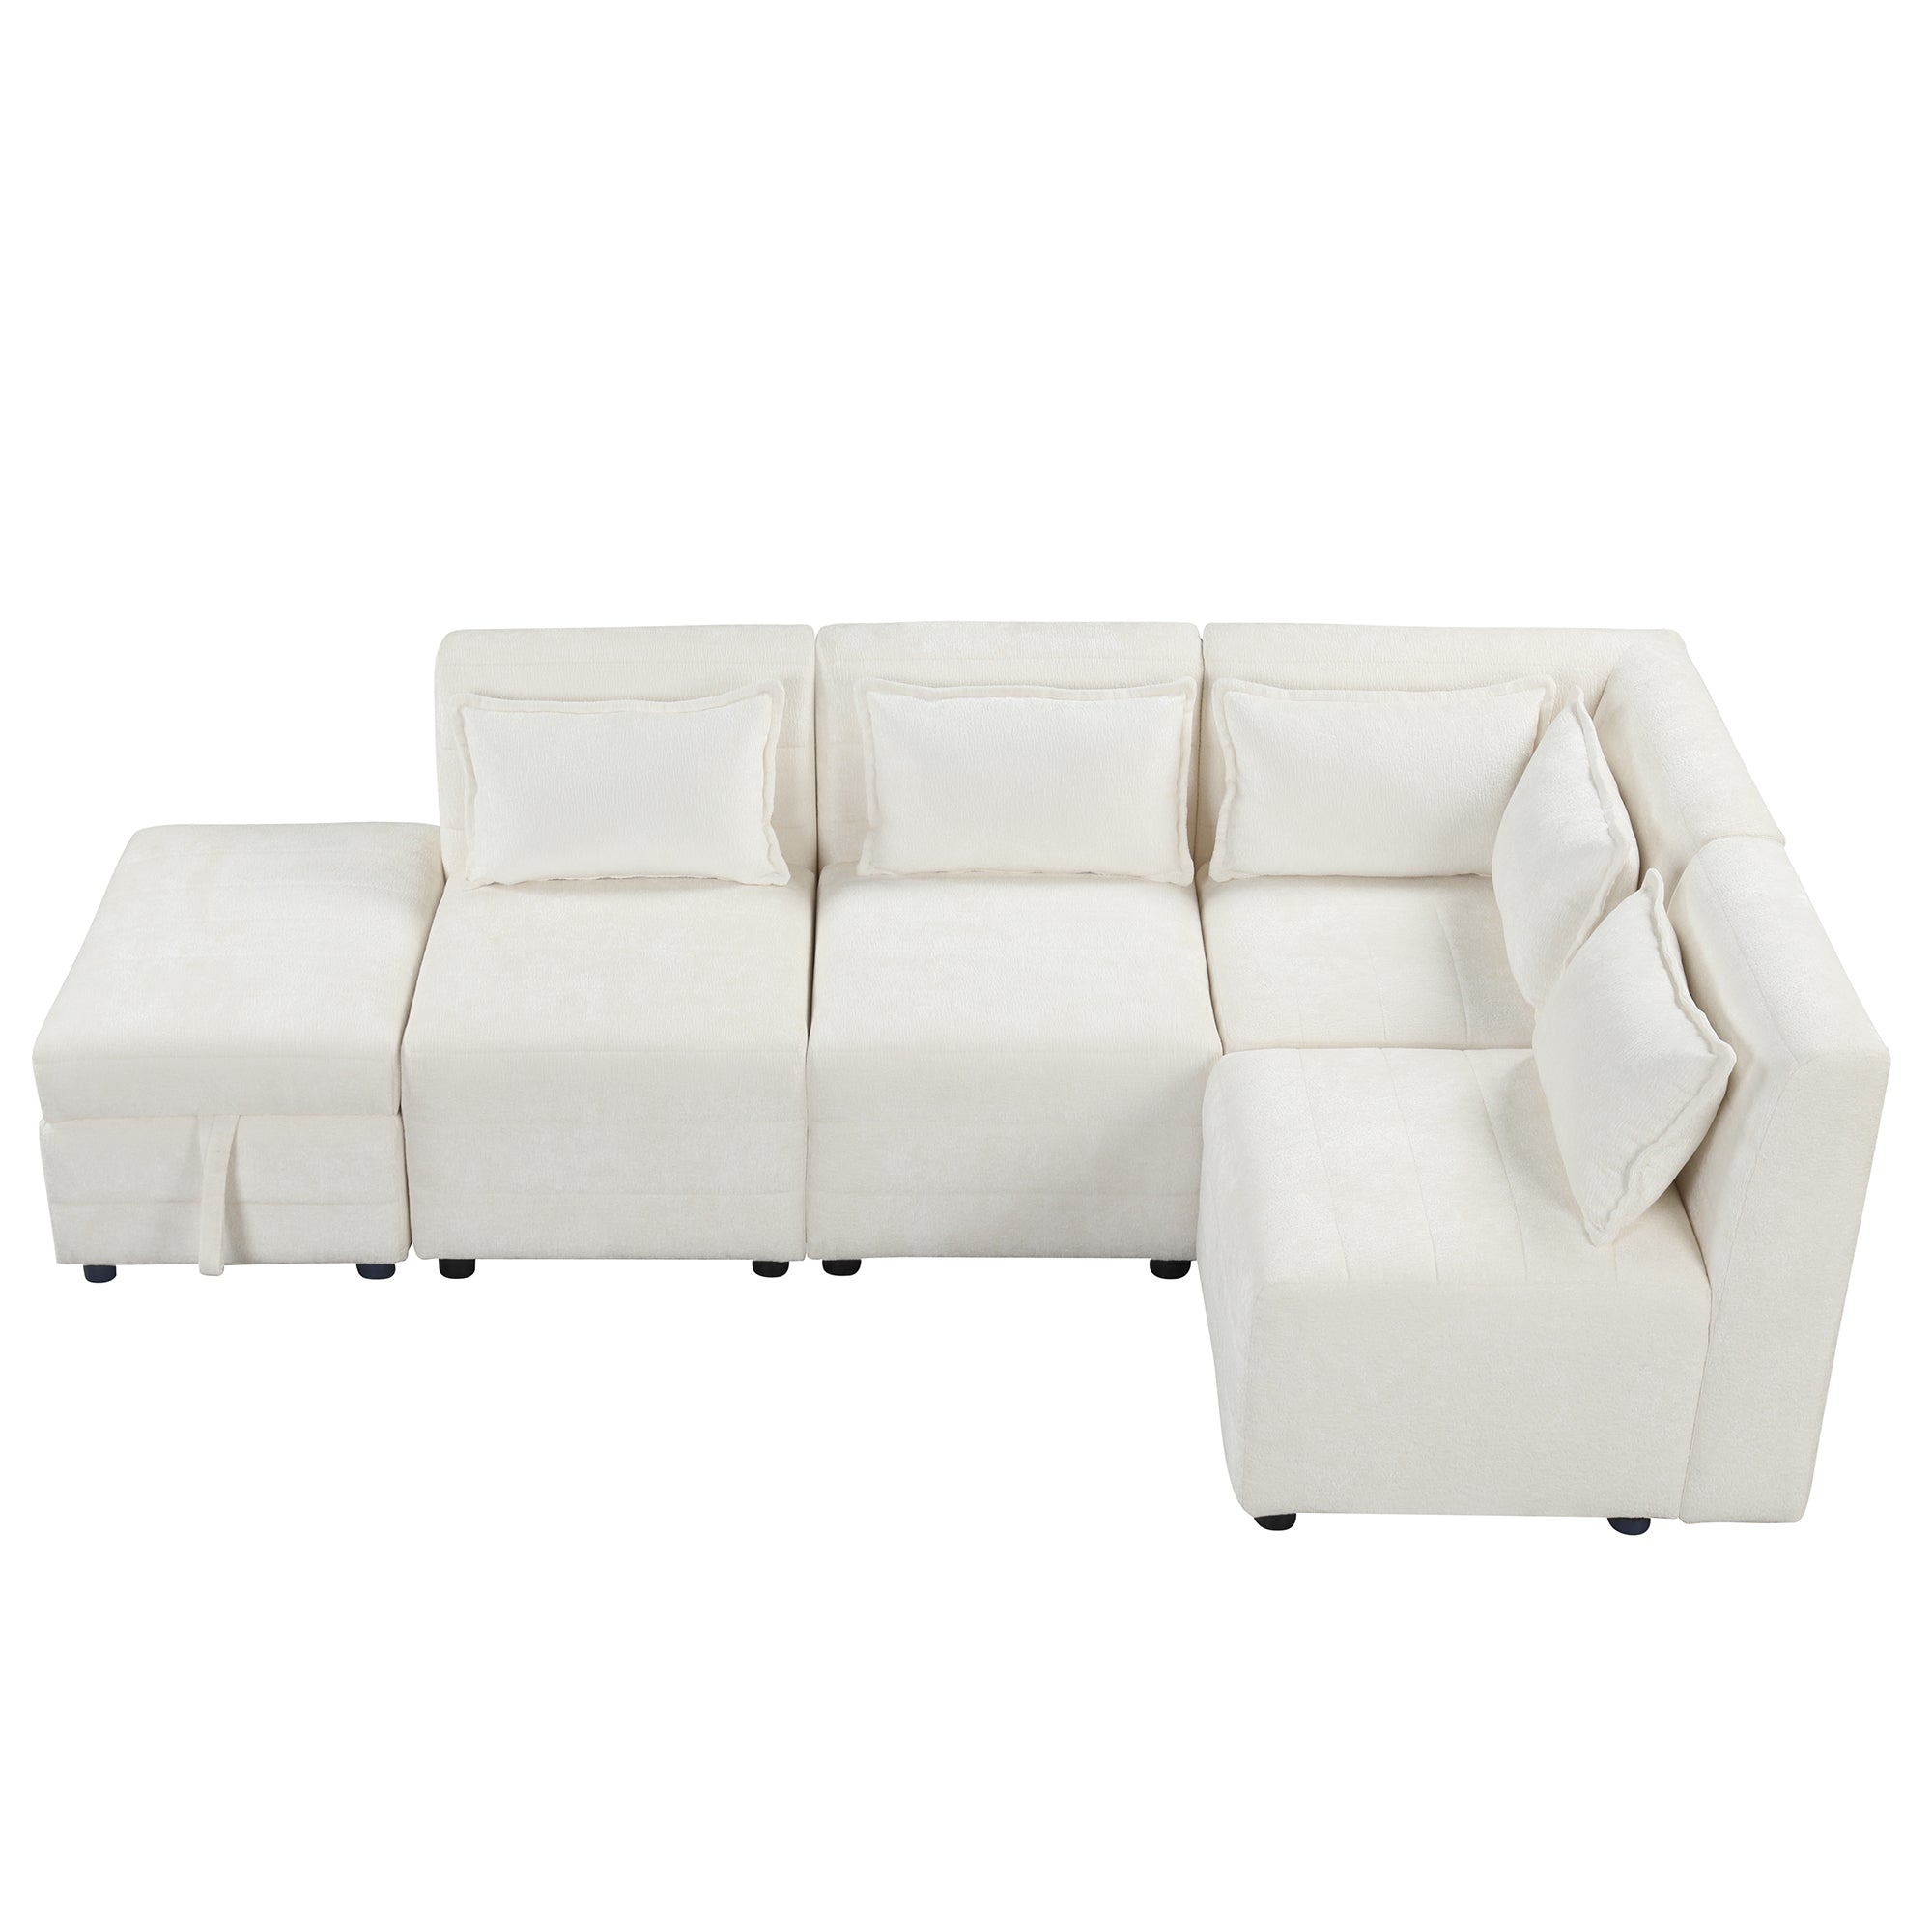 Free-Combined Sectional Sofa 5-seater Modular Couches with Storage - bd8ab813f4544d46bdc07e829d726b2d